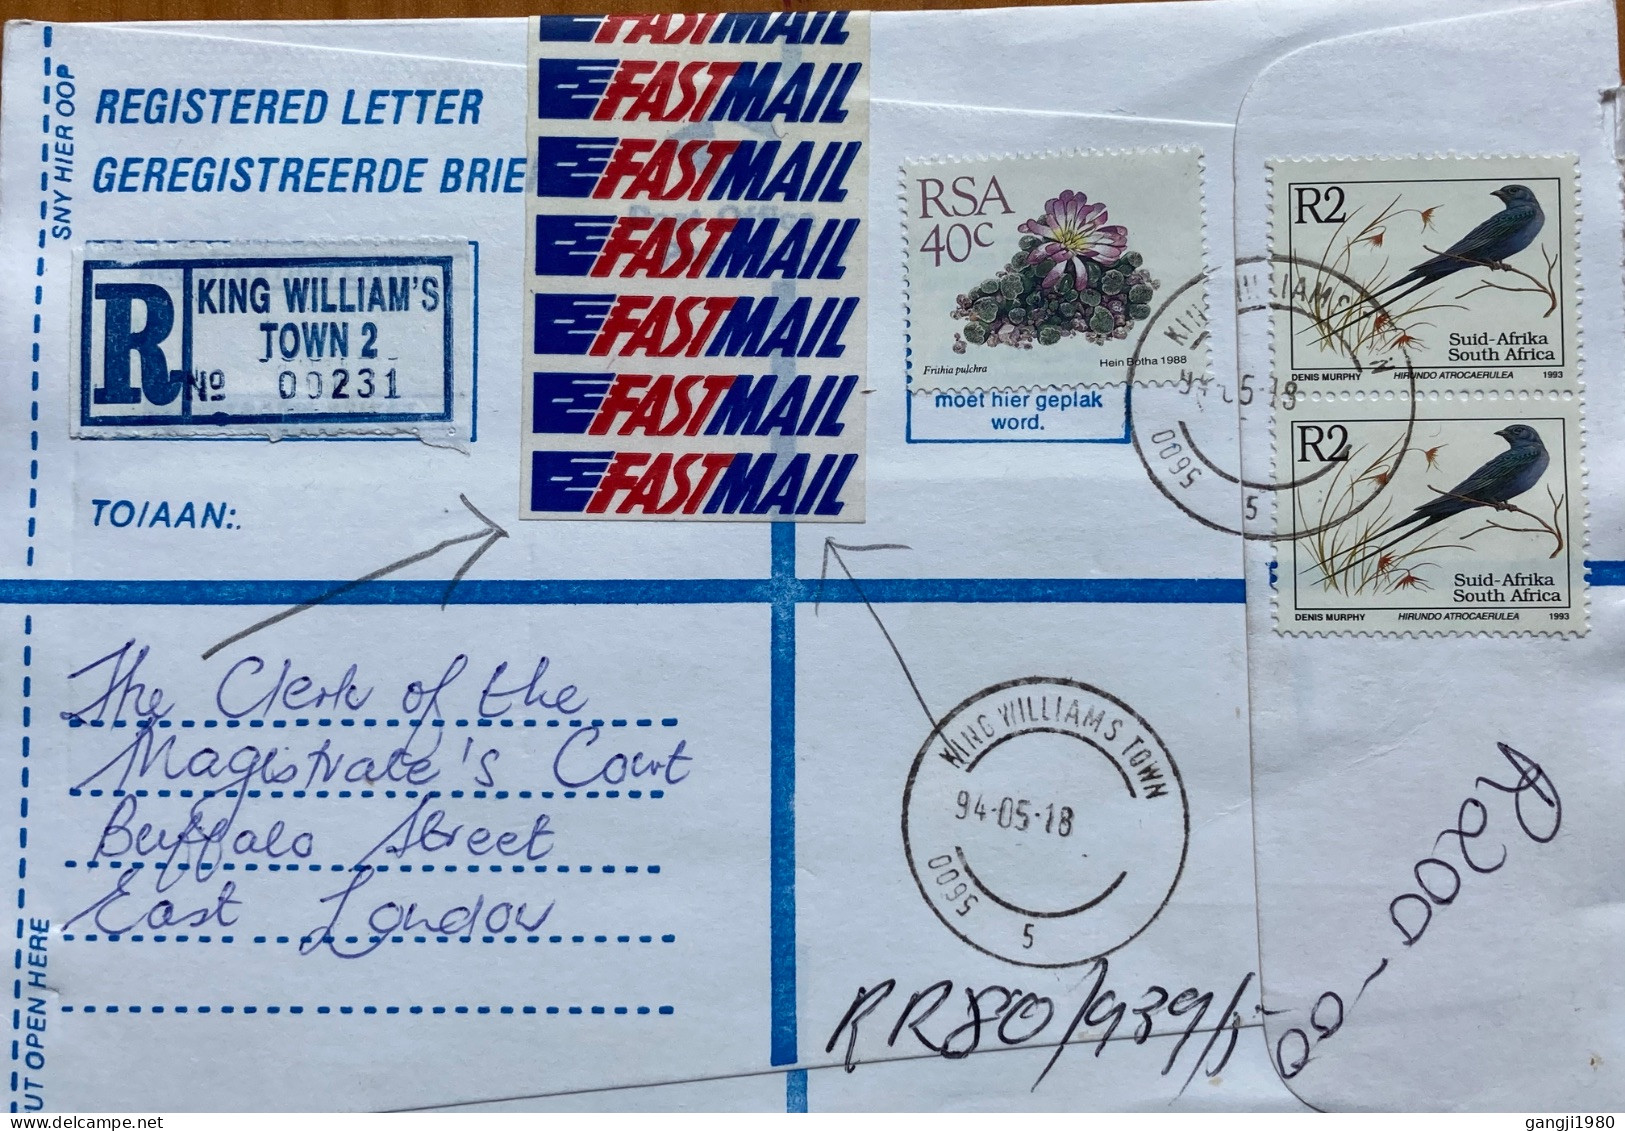 SOUTH AFRICA-1994, REGISTER STATIONERY, COVER USED, 3 SIDE OPEN, VIGNETTE FASTMAIL LABEL, BIRD & FLOWER, KING WILLIAM'S - Lettres & Documents